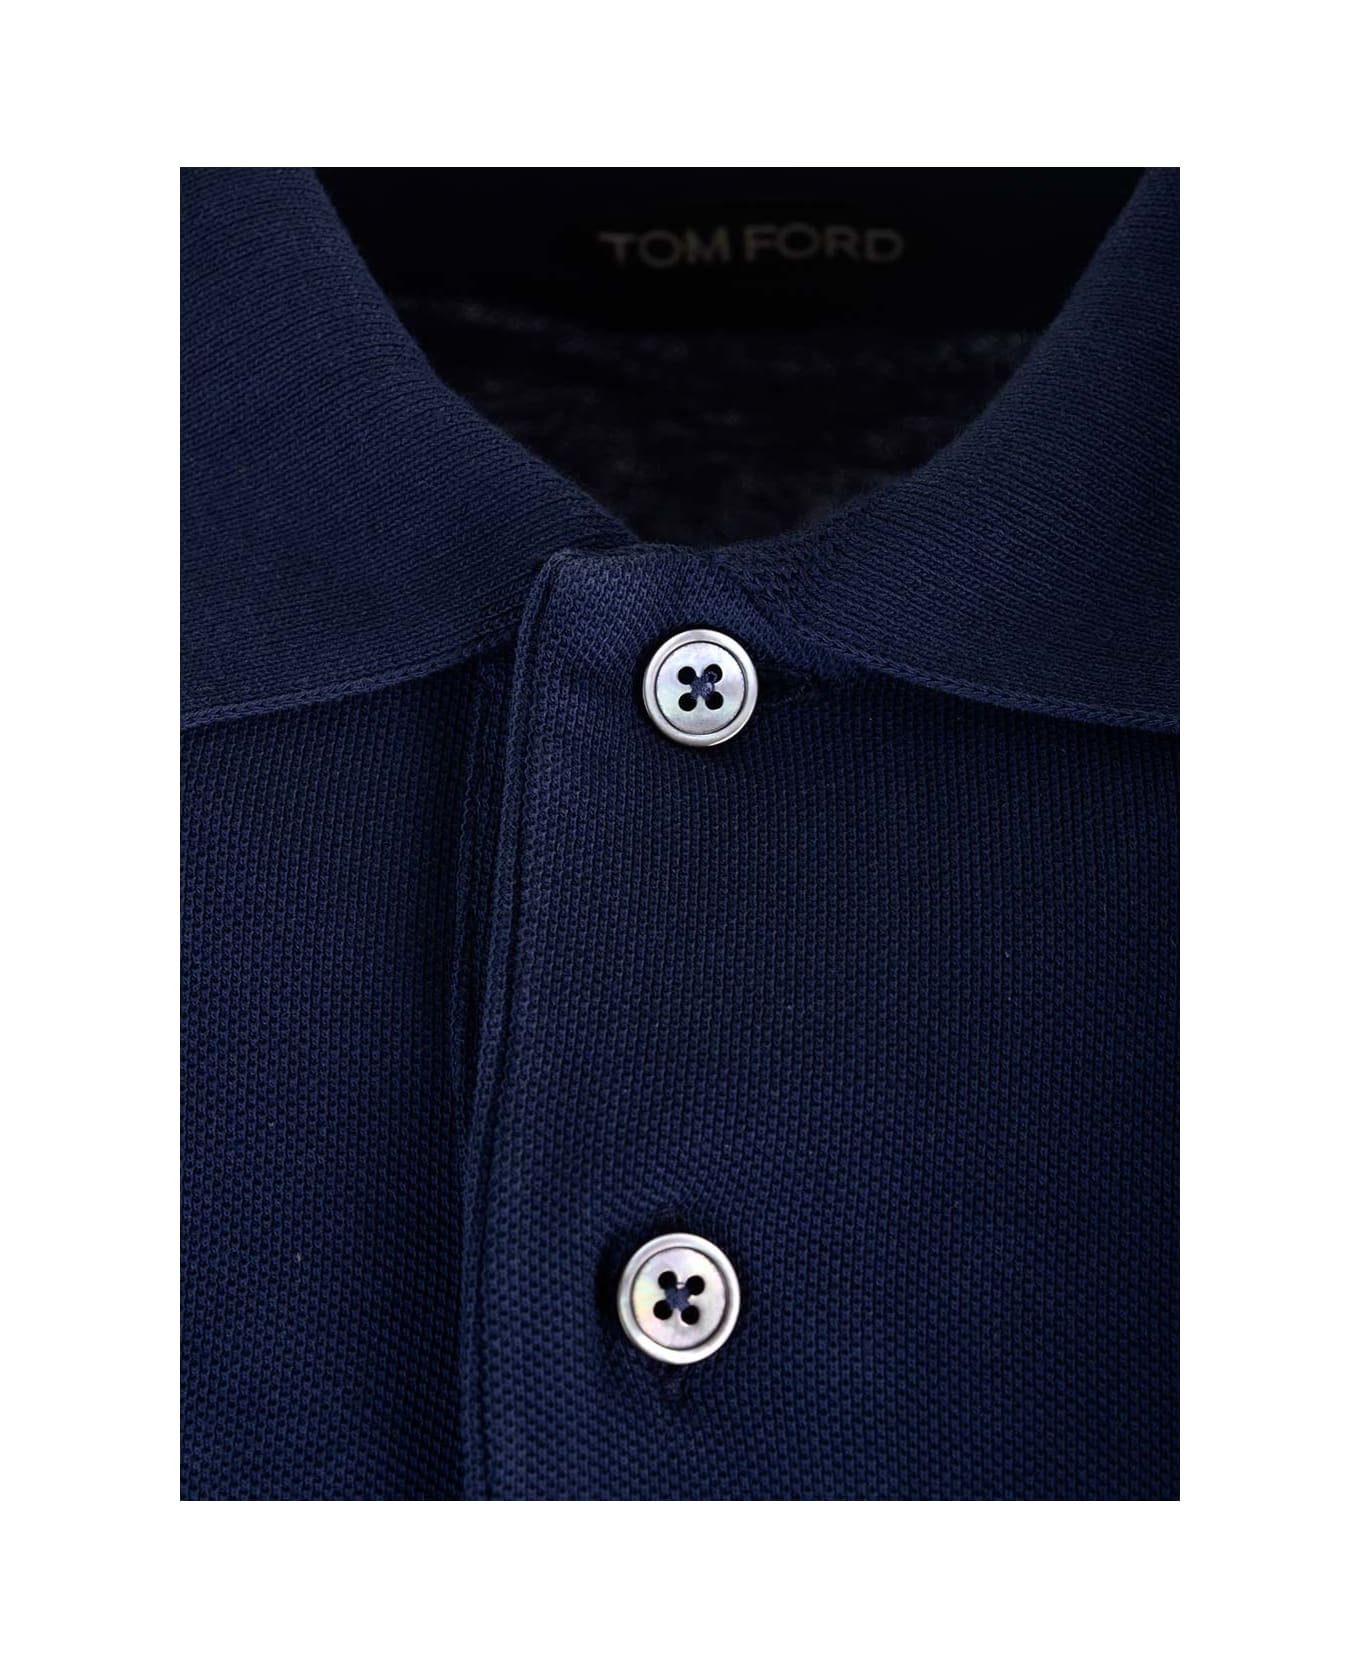 Tom Ford Navy Blue Cotton Polo Shirt - INK ポロシャツ